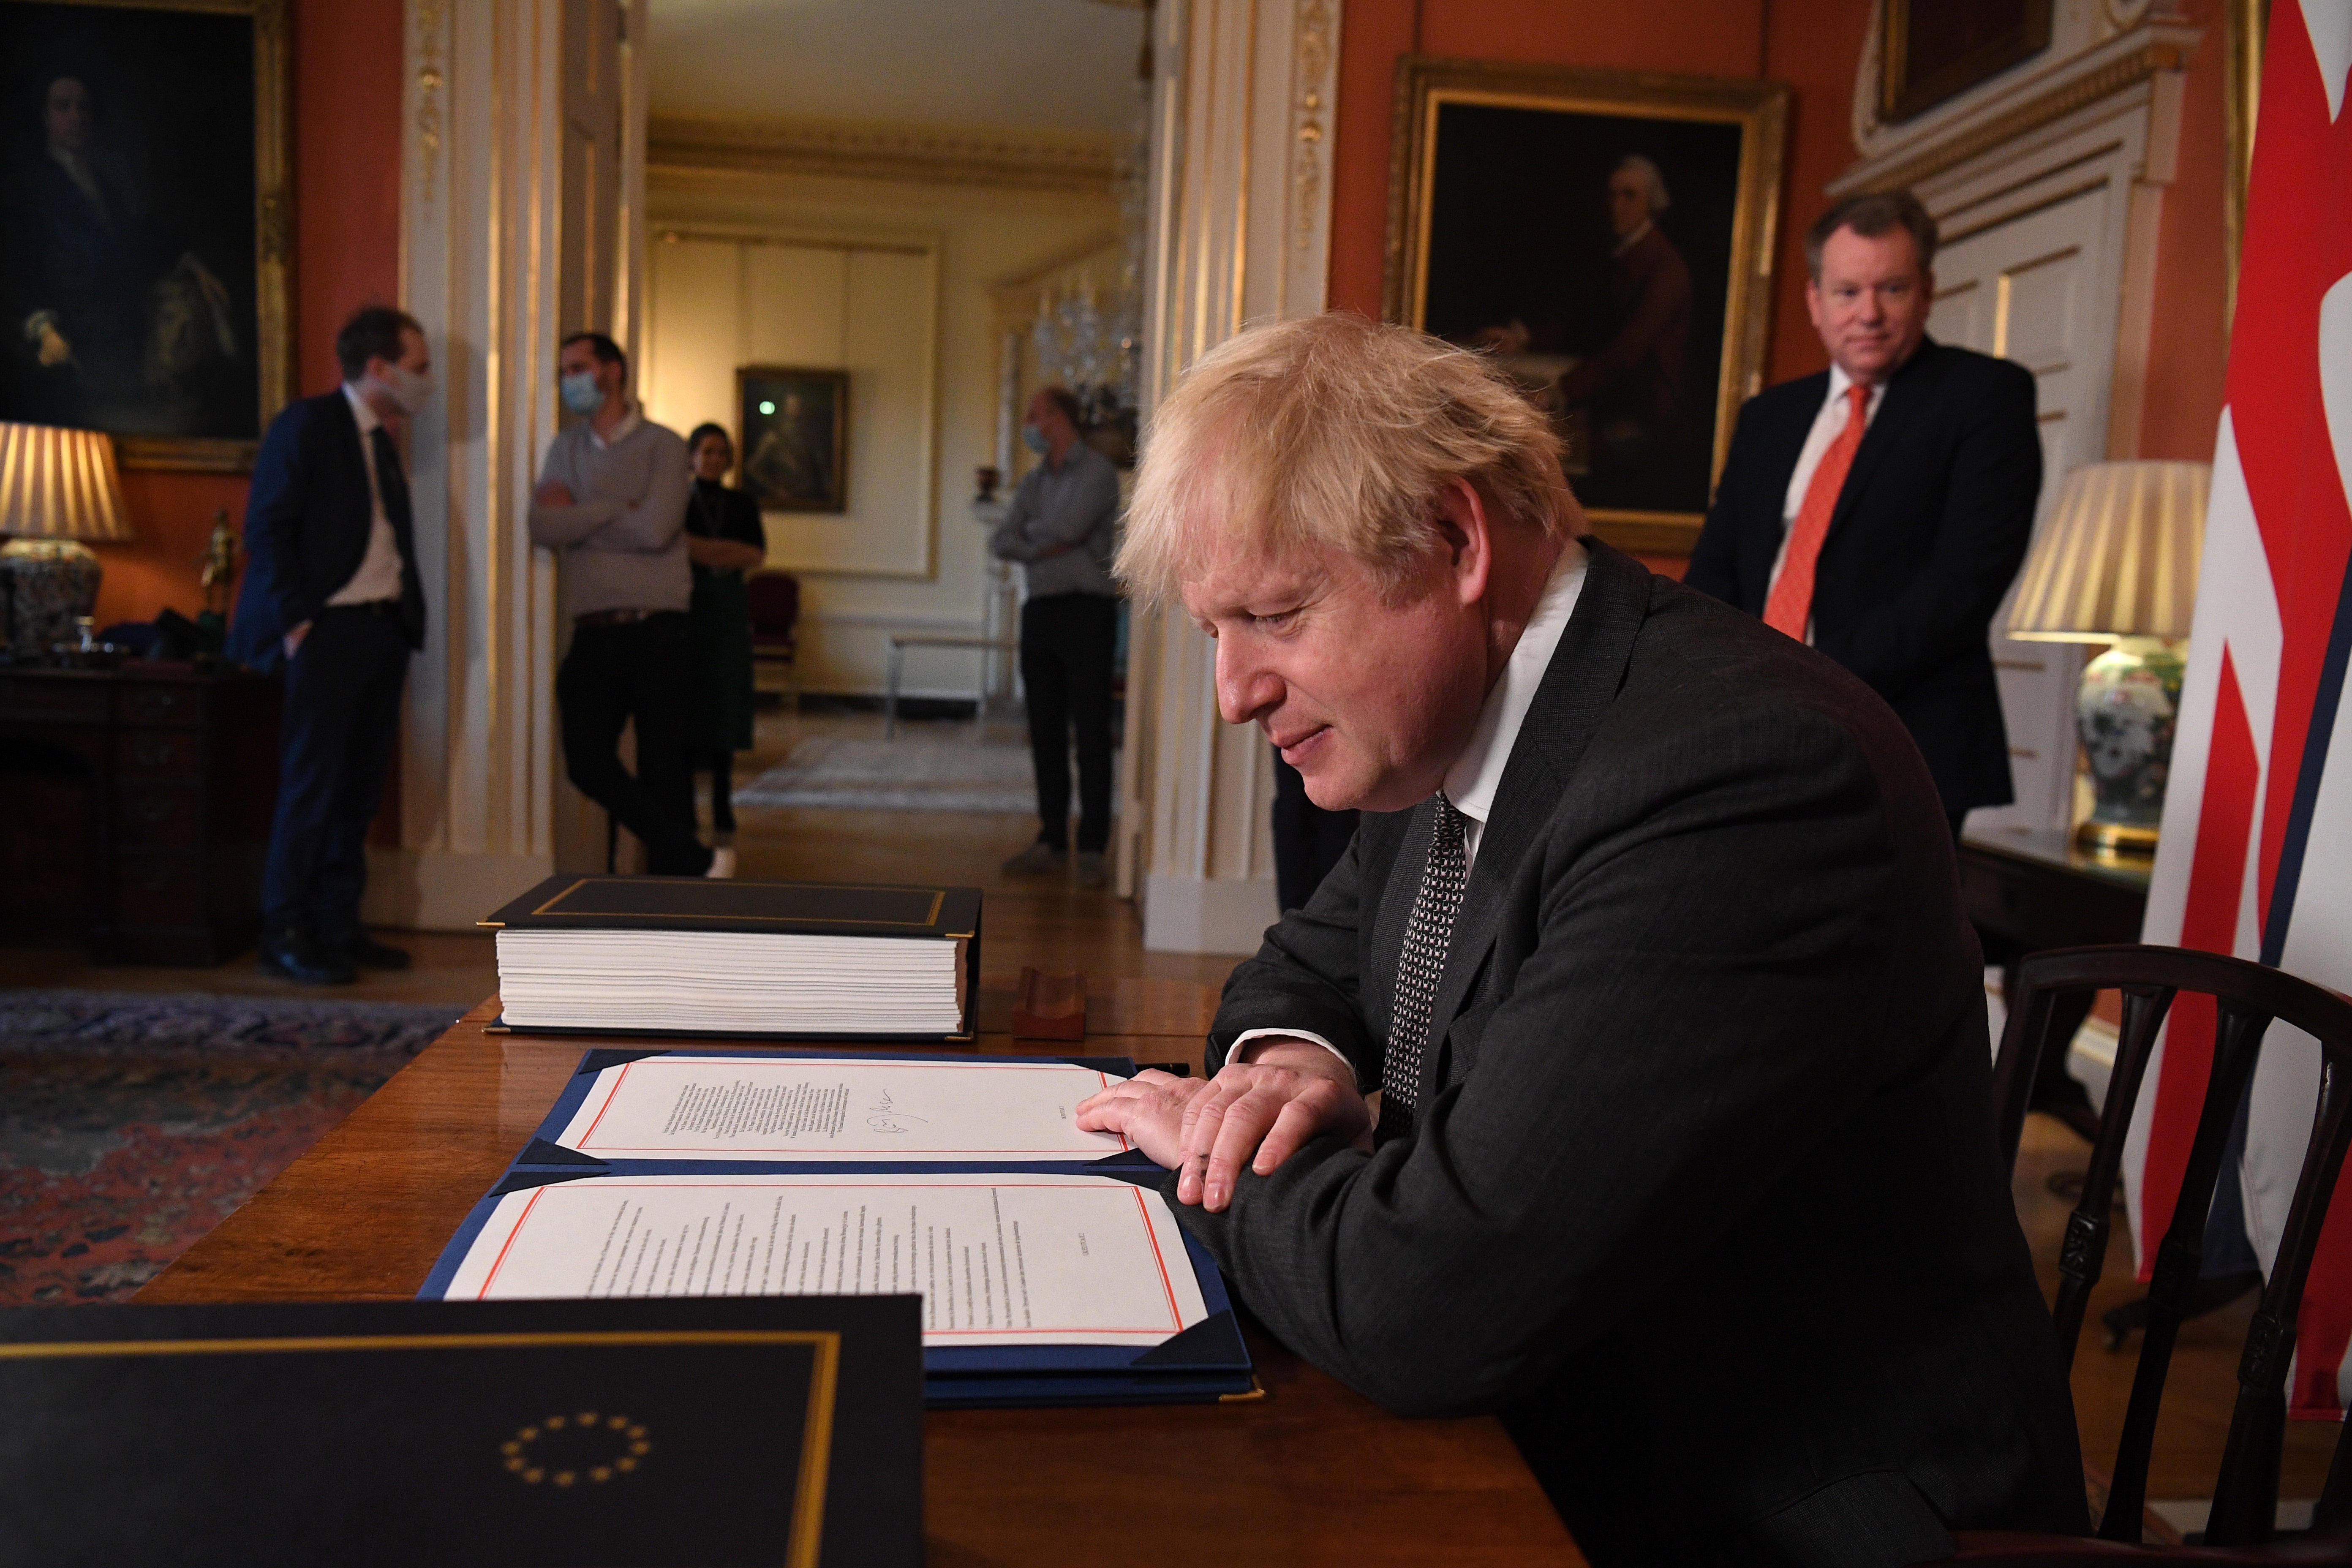 David Frost looks on as Boris Johnson prepares to sign the EU-UK Trade and Cooperation Agreement in 2020